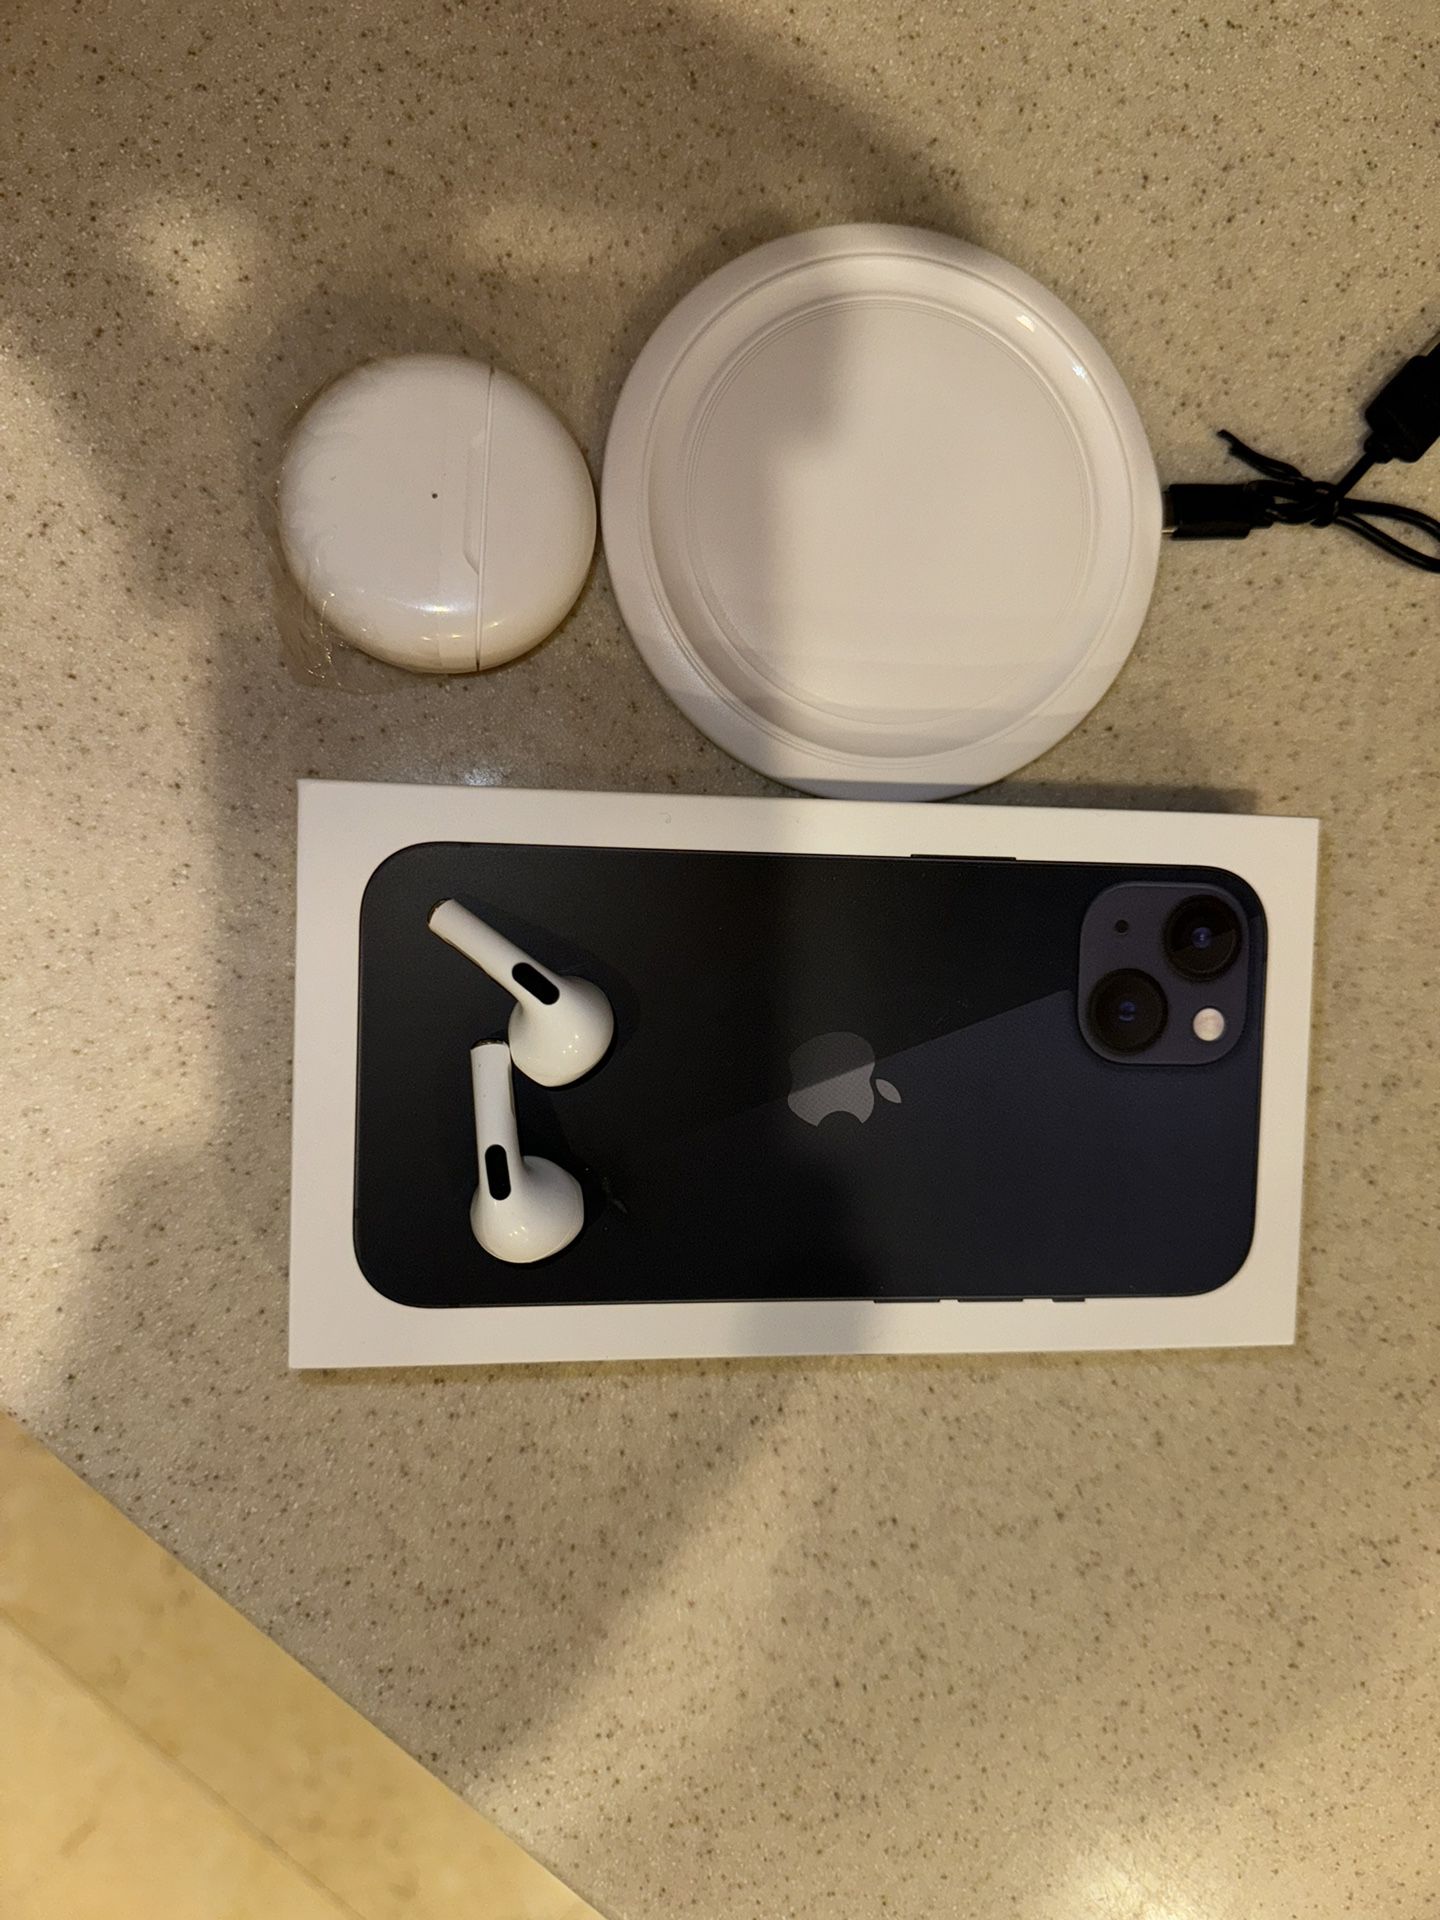 New iPhone 11 With Wireless Charger And Bluetooth Headset 